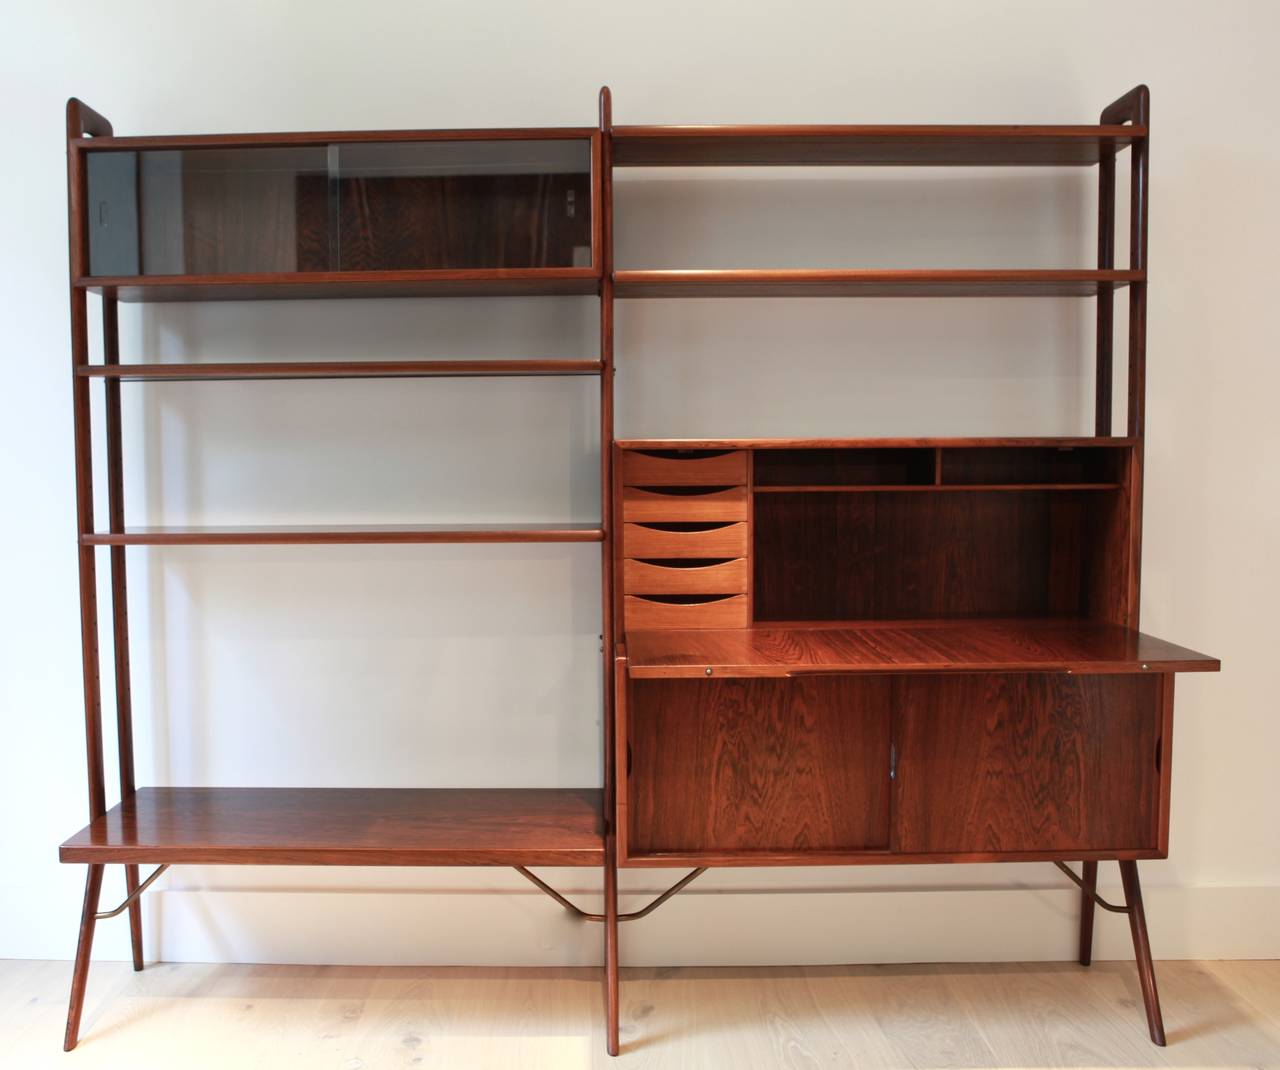 A rare rosewood bookshelf with sliding glass doors and a hideable secrétaire with small drawers and lower brass supports.
In perfect vintage condition.